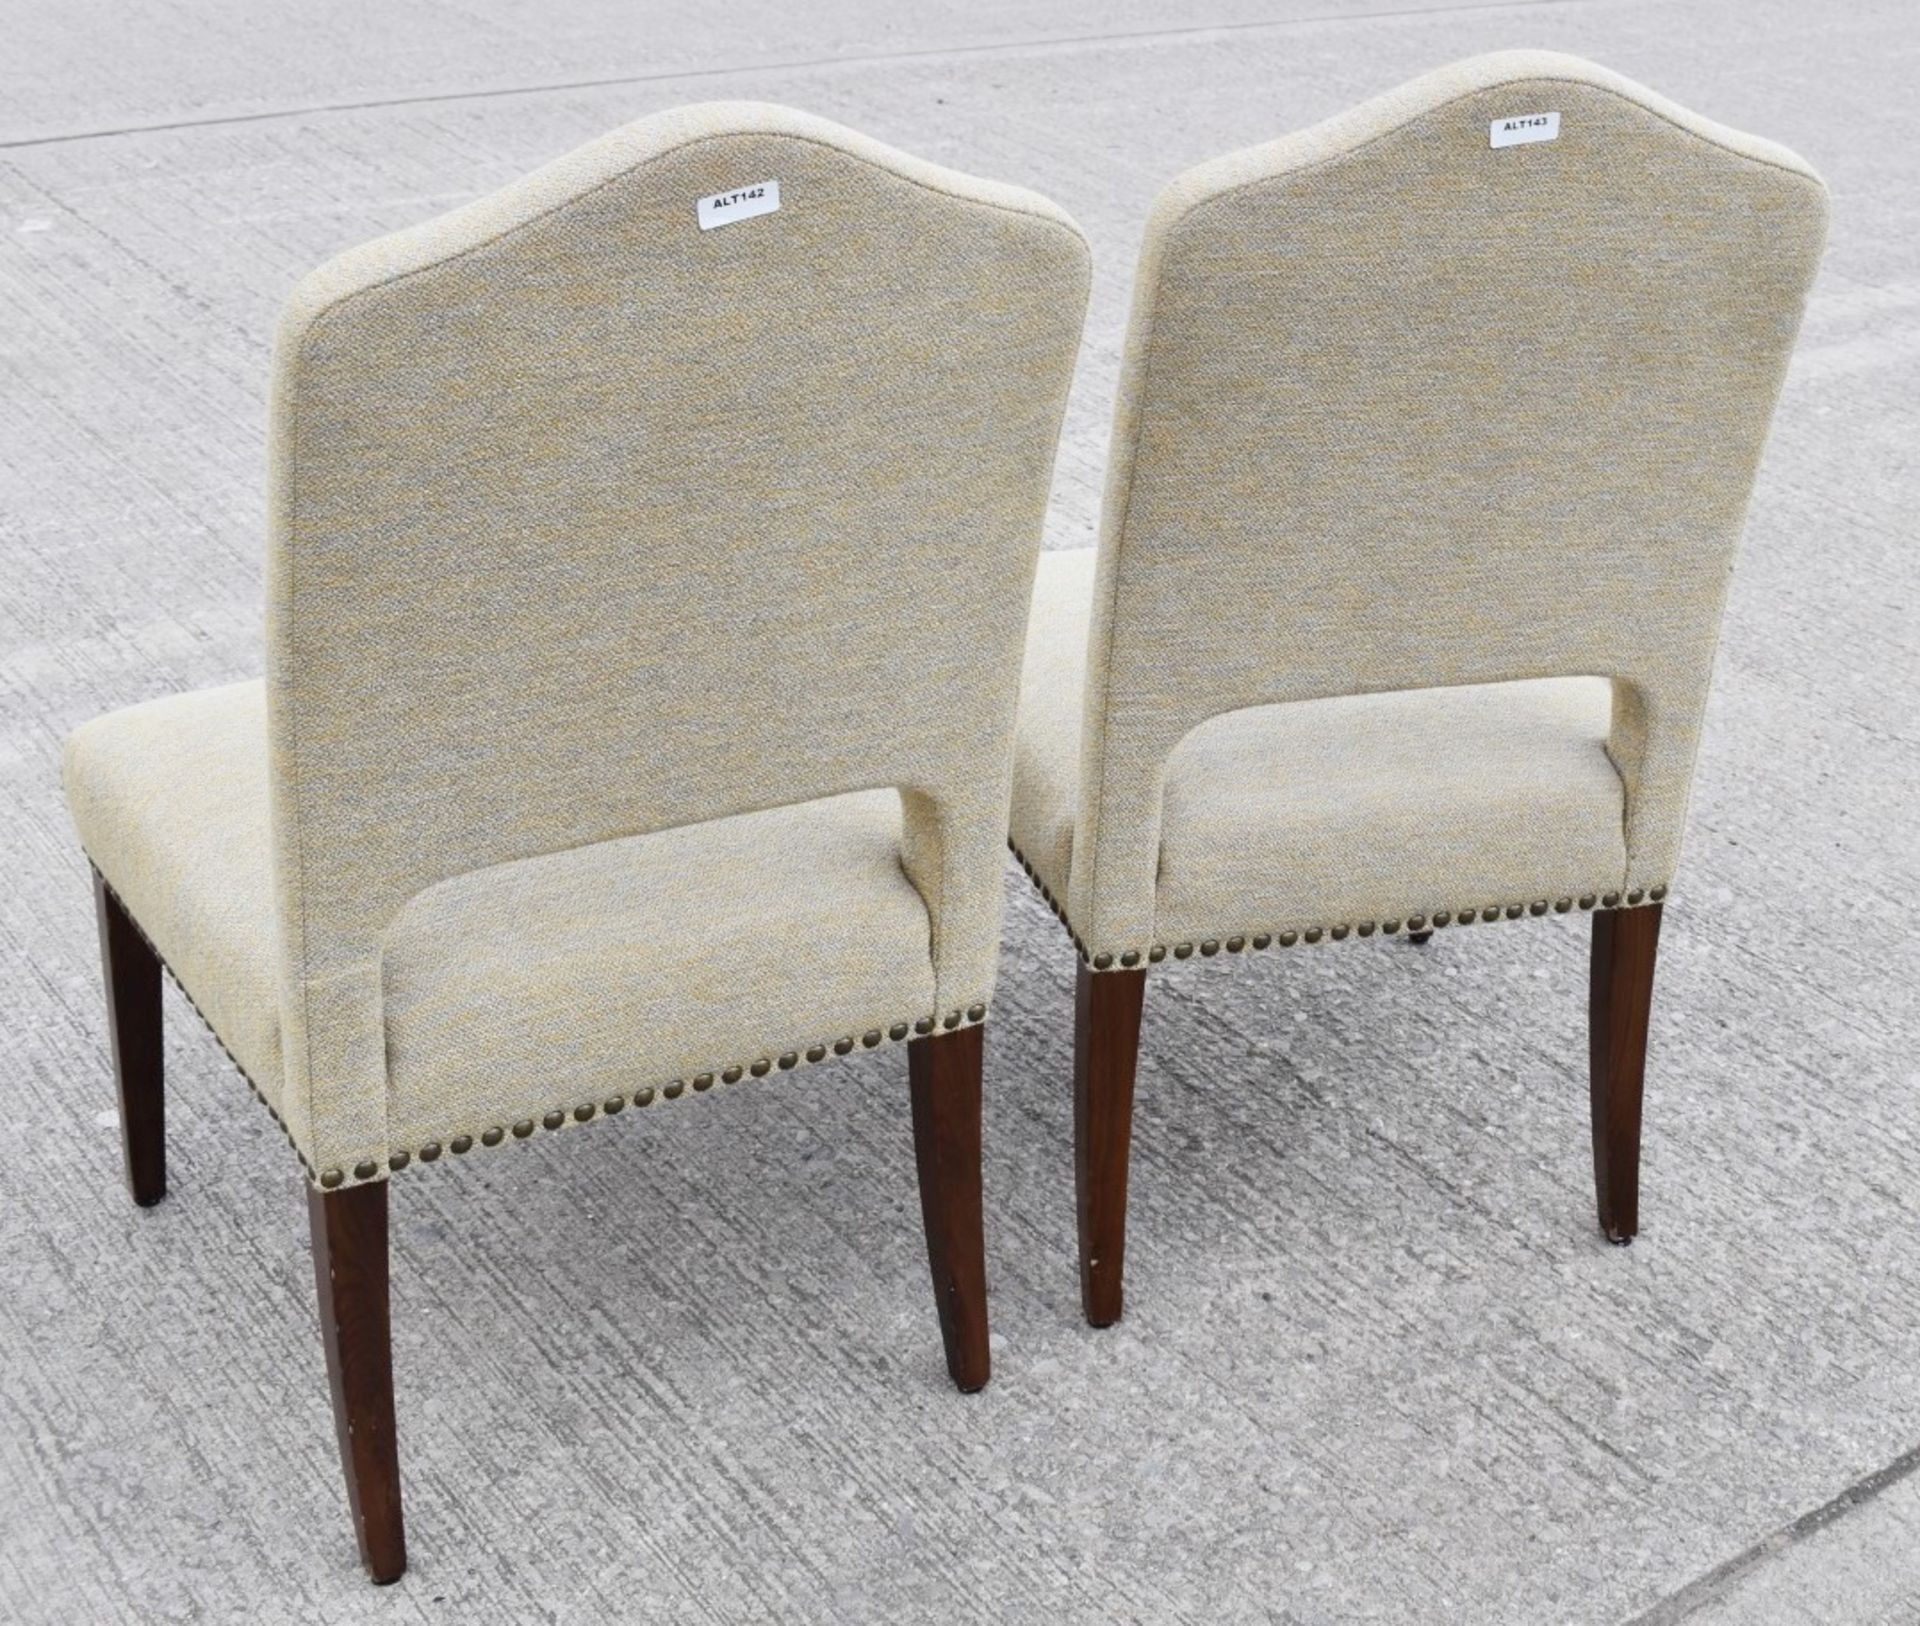 Pair Of Finely Crafted Studded Chairs Upholstered in a Premium Woven Fabric with Wooden Legs - - Image 3 of 3